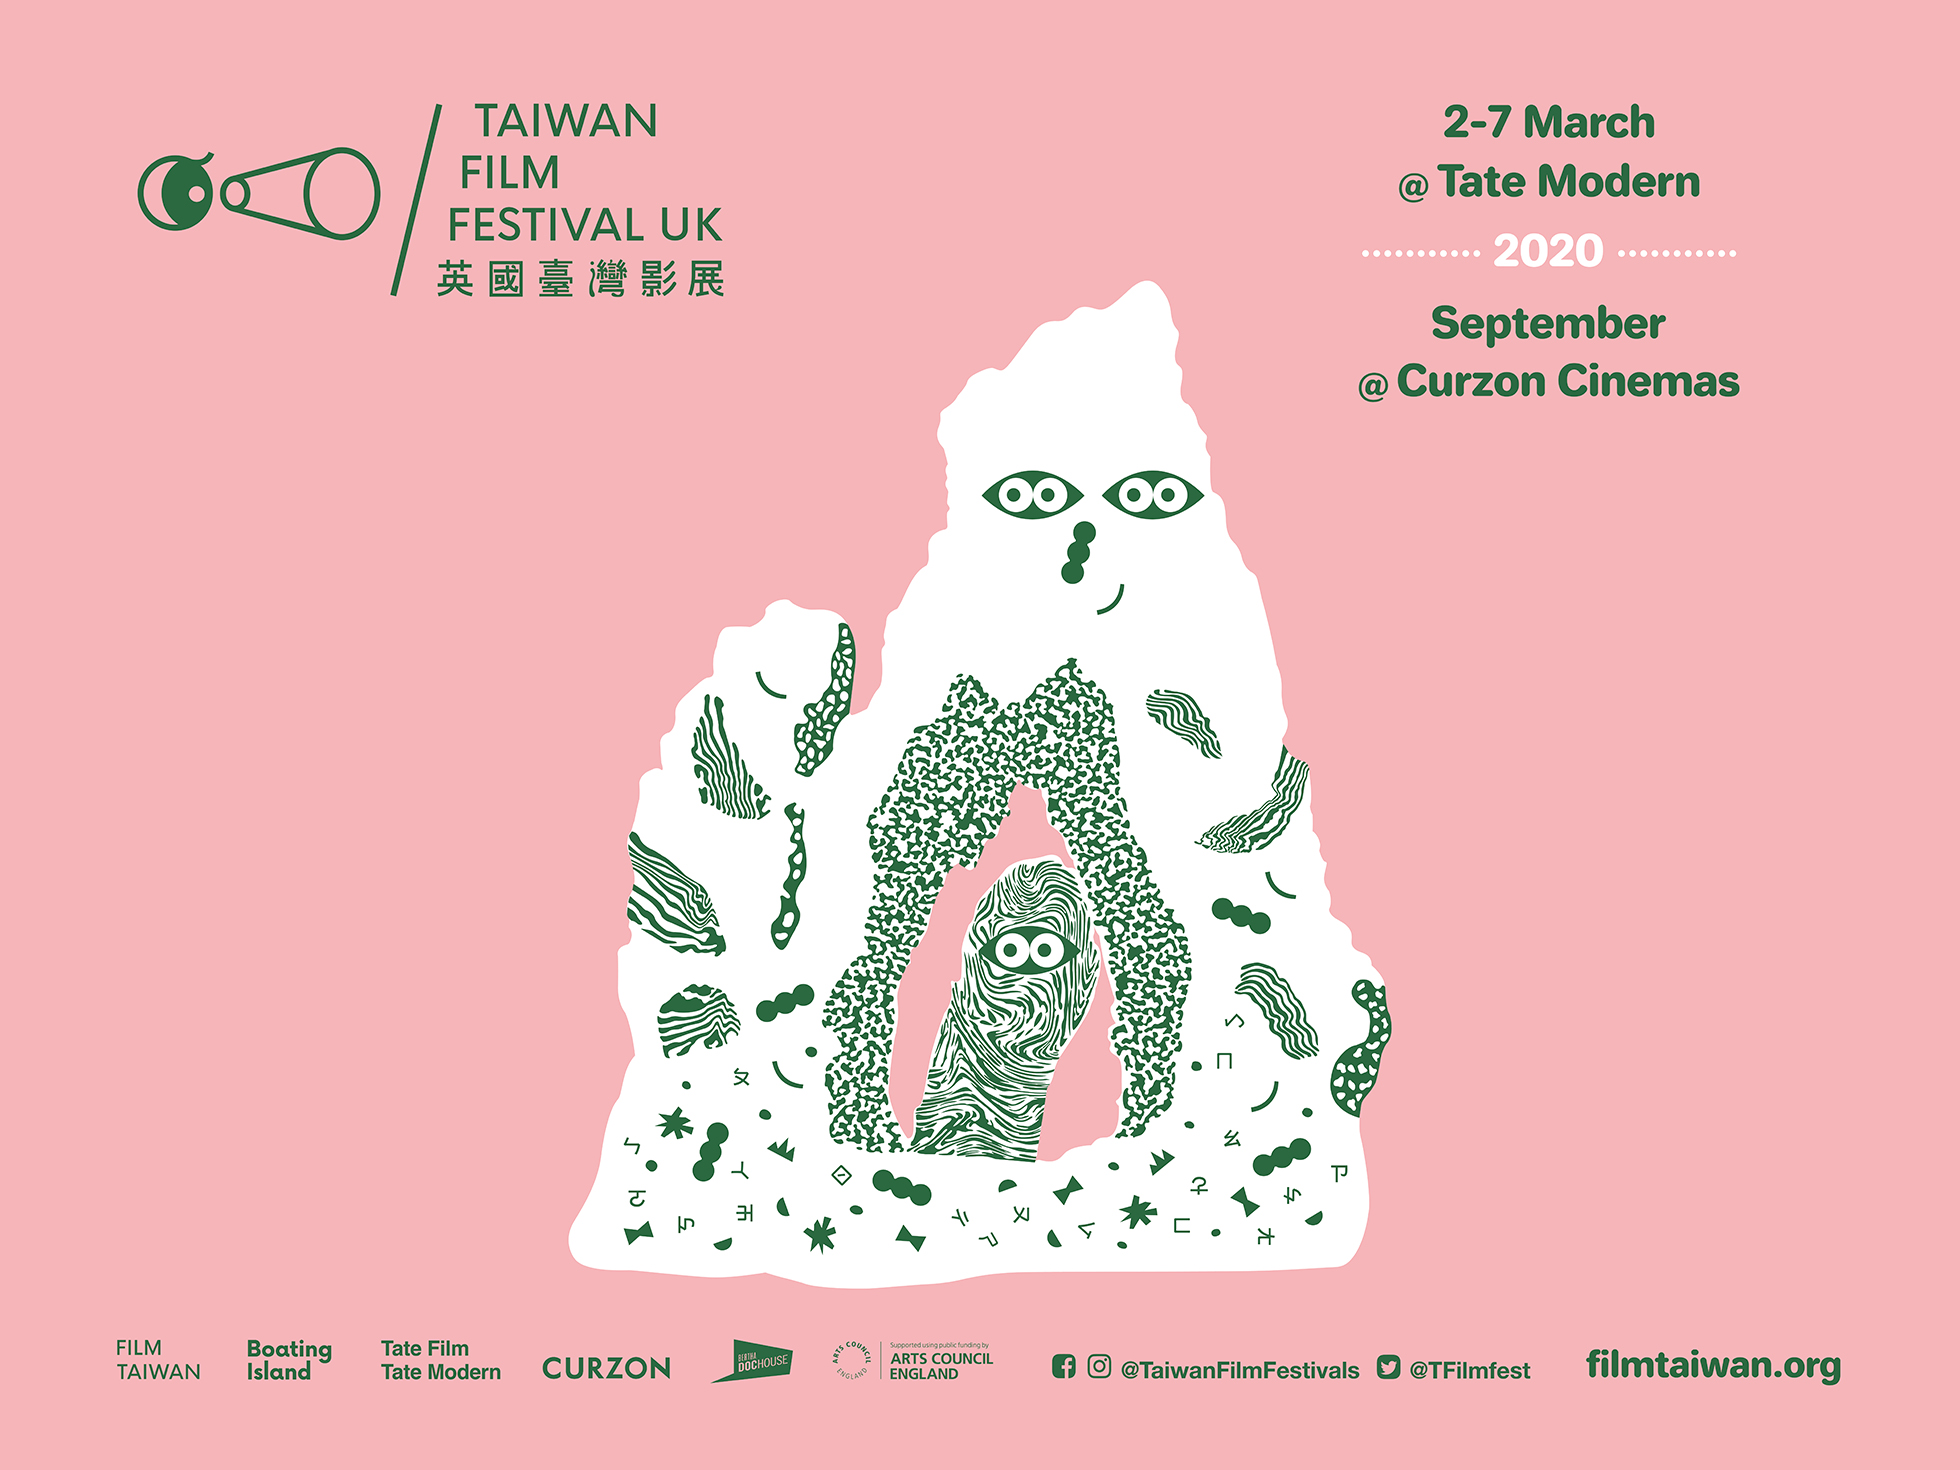 Taiwan Film Festival UK opens in March with Chen Chieh-jen program